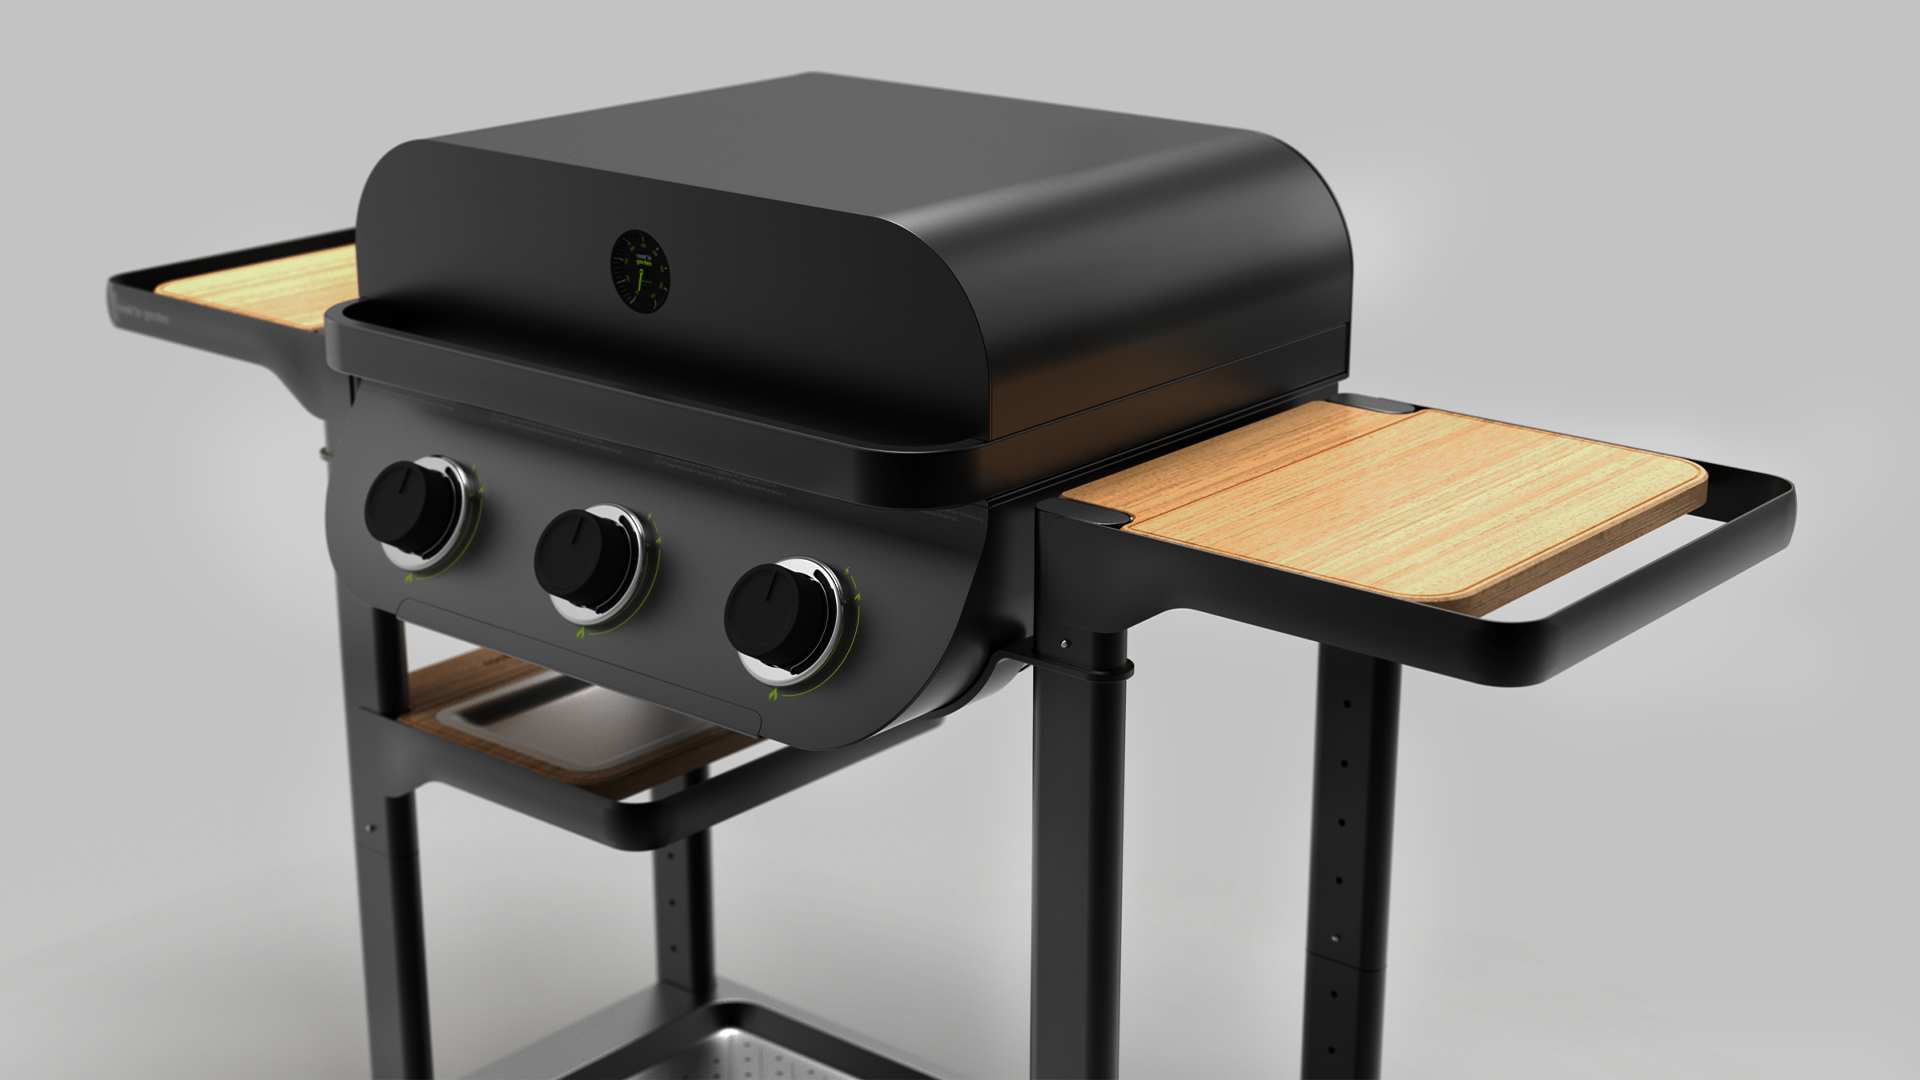 Flavo, an easy-to-use & modular gas barbecue